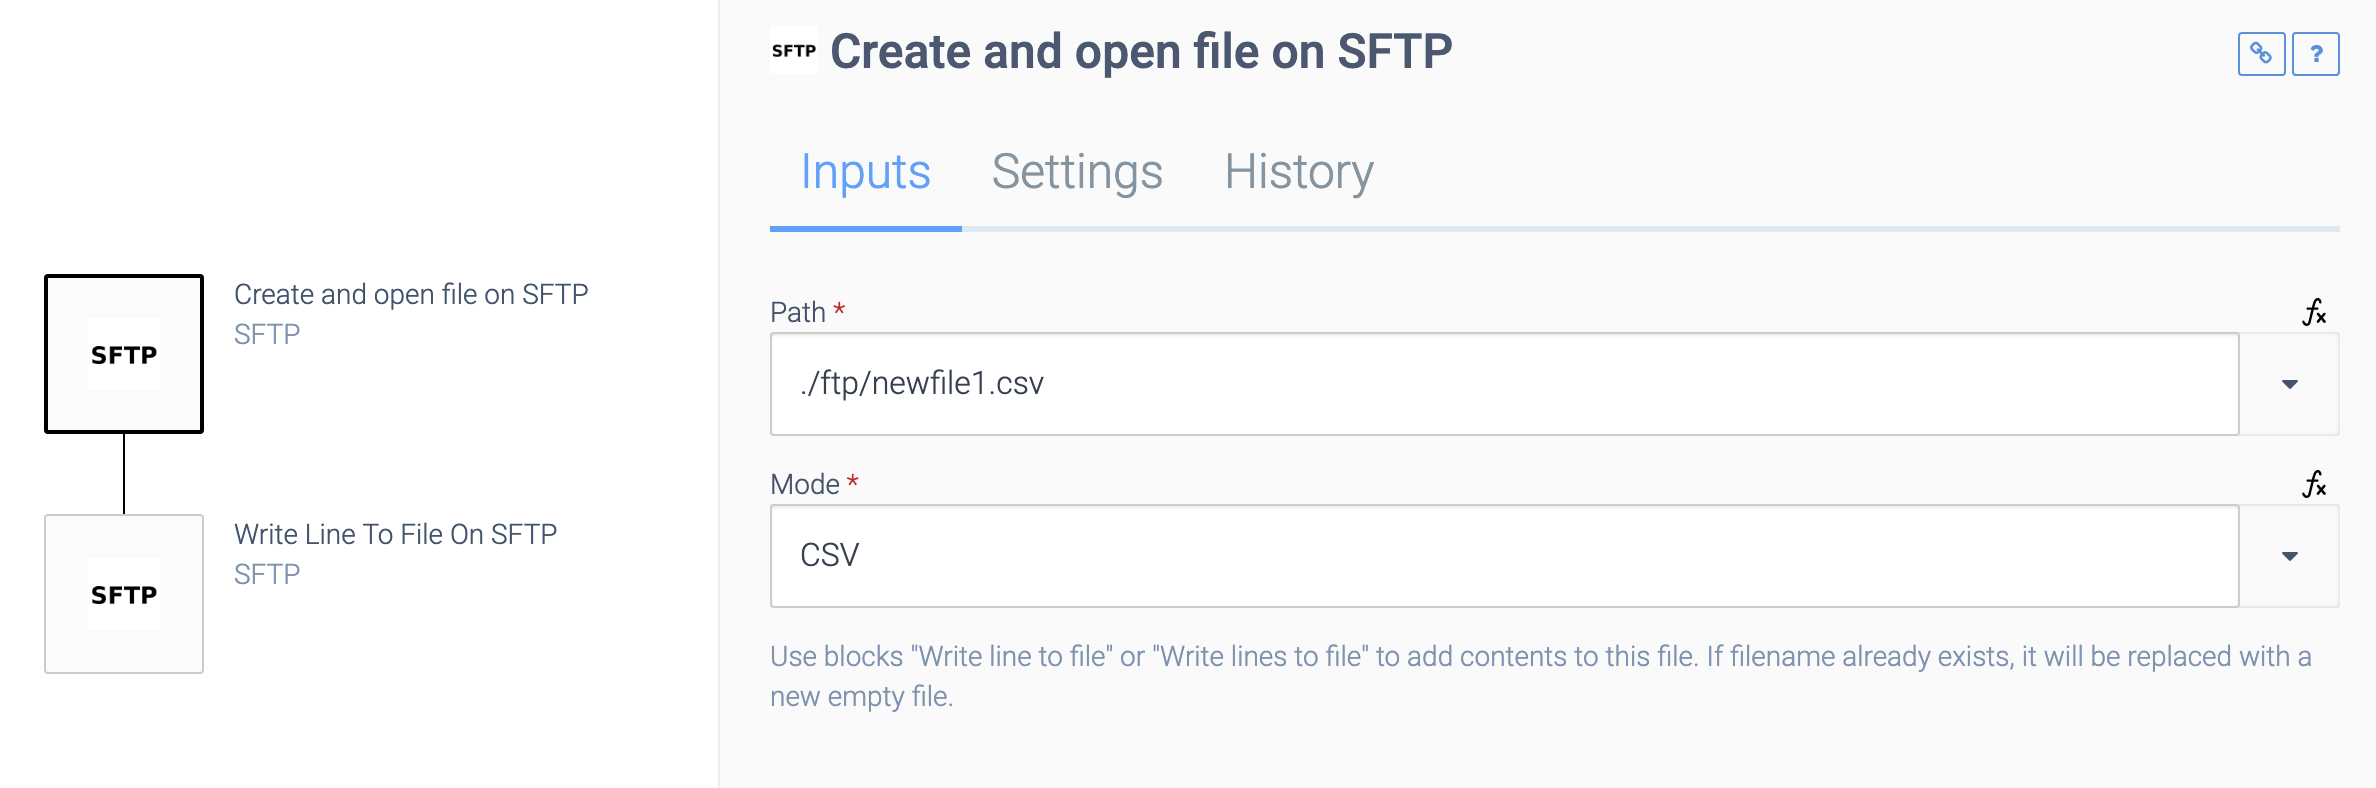 an automation consisting of a Create and open file on SFTP block and a Write Line To File On SFTP block. The Create and open file on SFTP block is selected. Its path is connected to a new csv file.